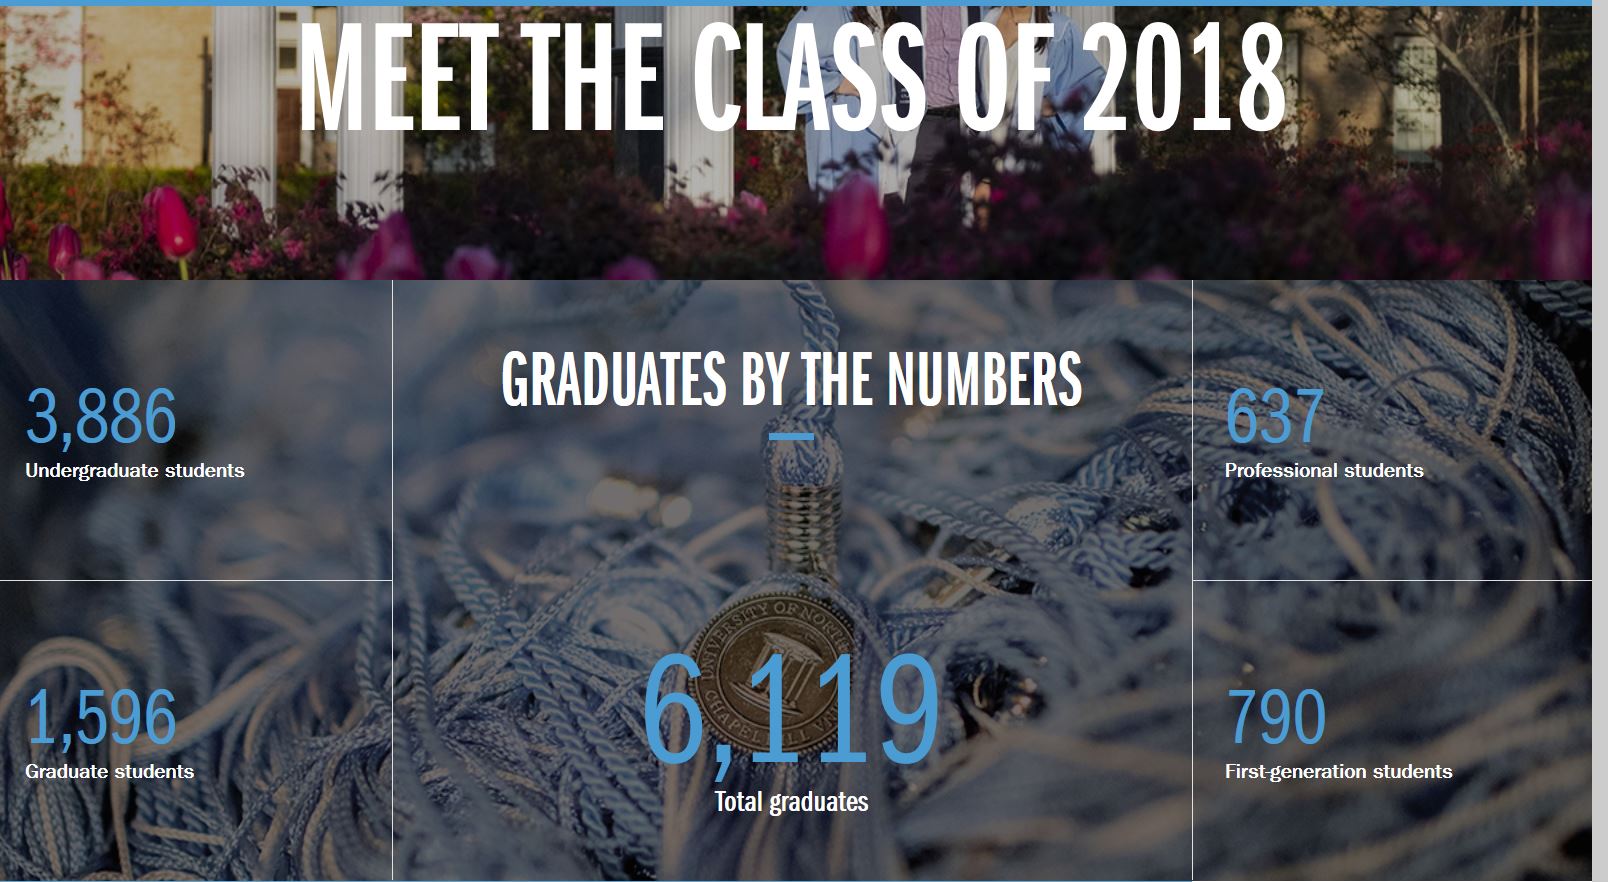 Meet the Class of 2018: Graduates by the numbers: 6,119; 637 Professional Students; 790 first-generation students; 3,886 undergraduate students; 1,596 graduate students (this text is overlaid onto a collage of images, the main one focuses on a tassel).